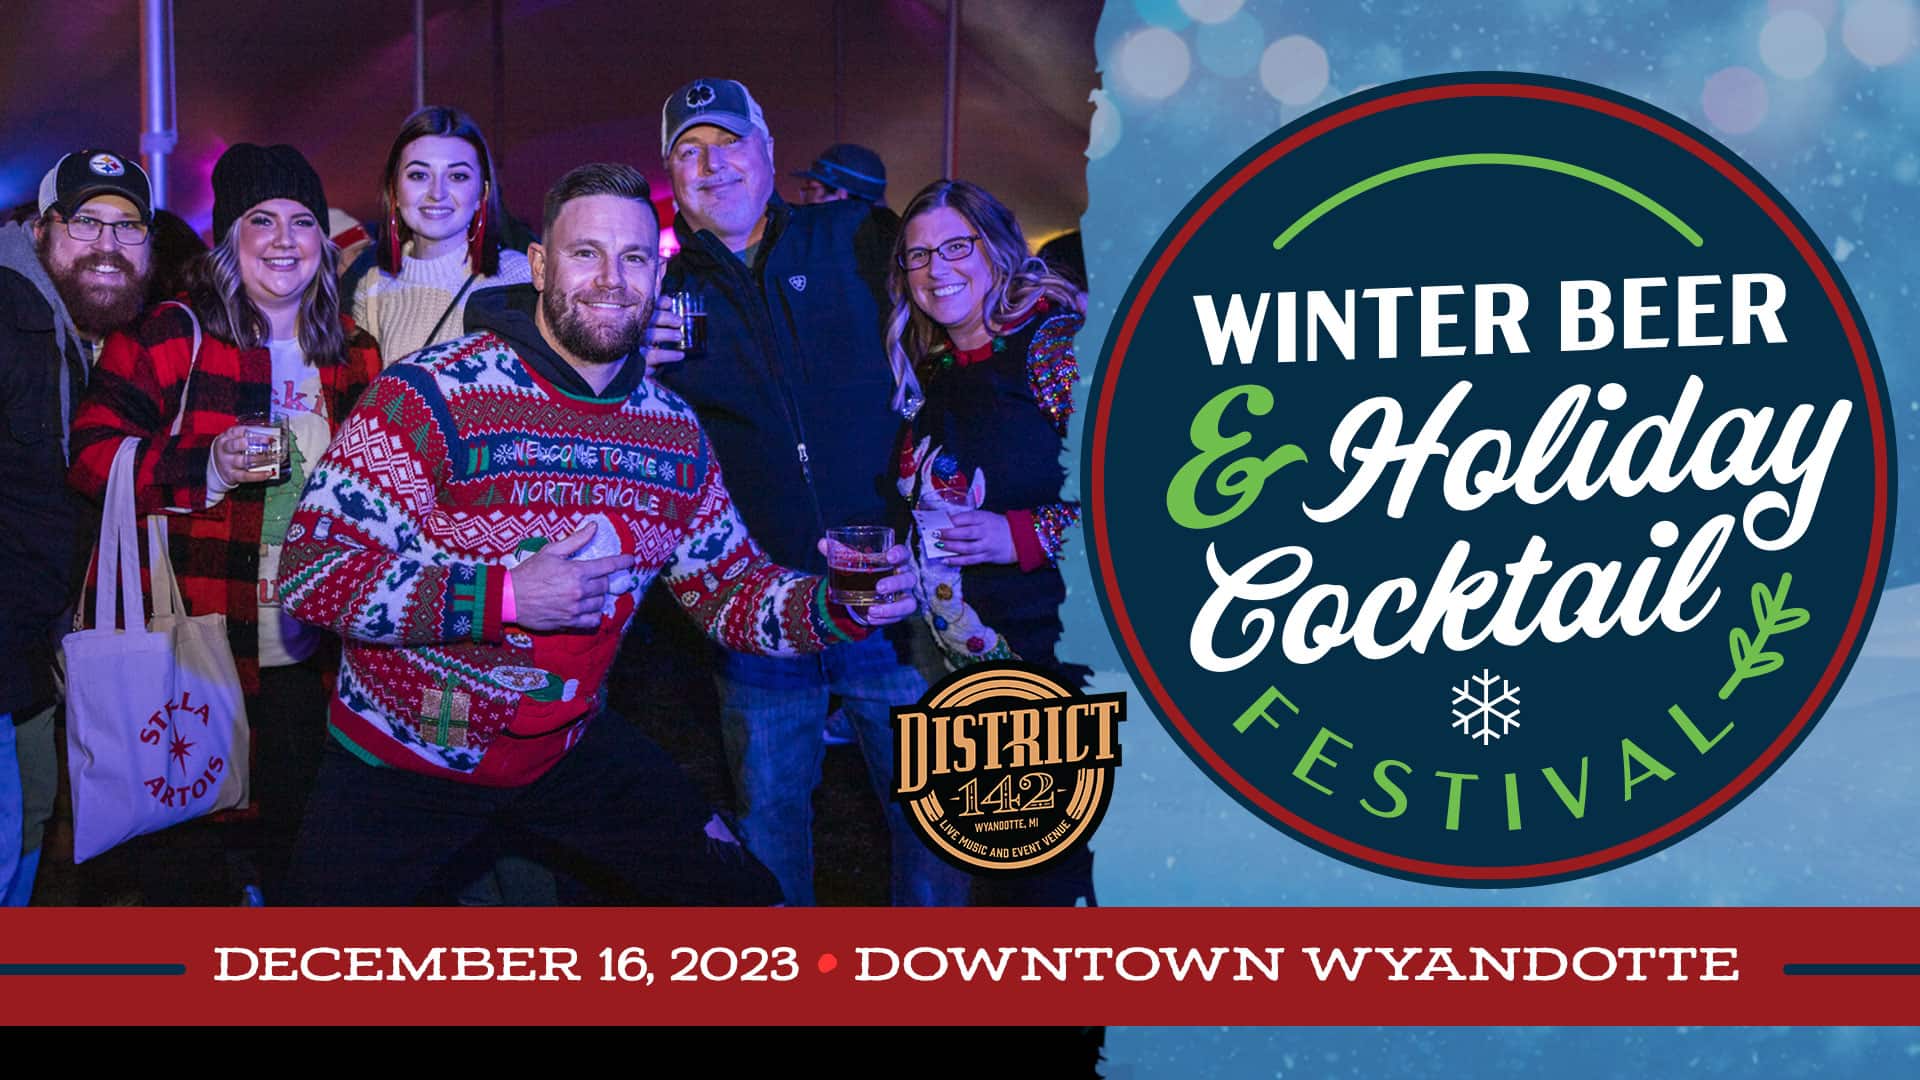 Winter Beer & Holiday Cocktail Festival on December 16, 2023 at District 142 in Downtown Wyandotte